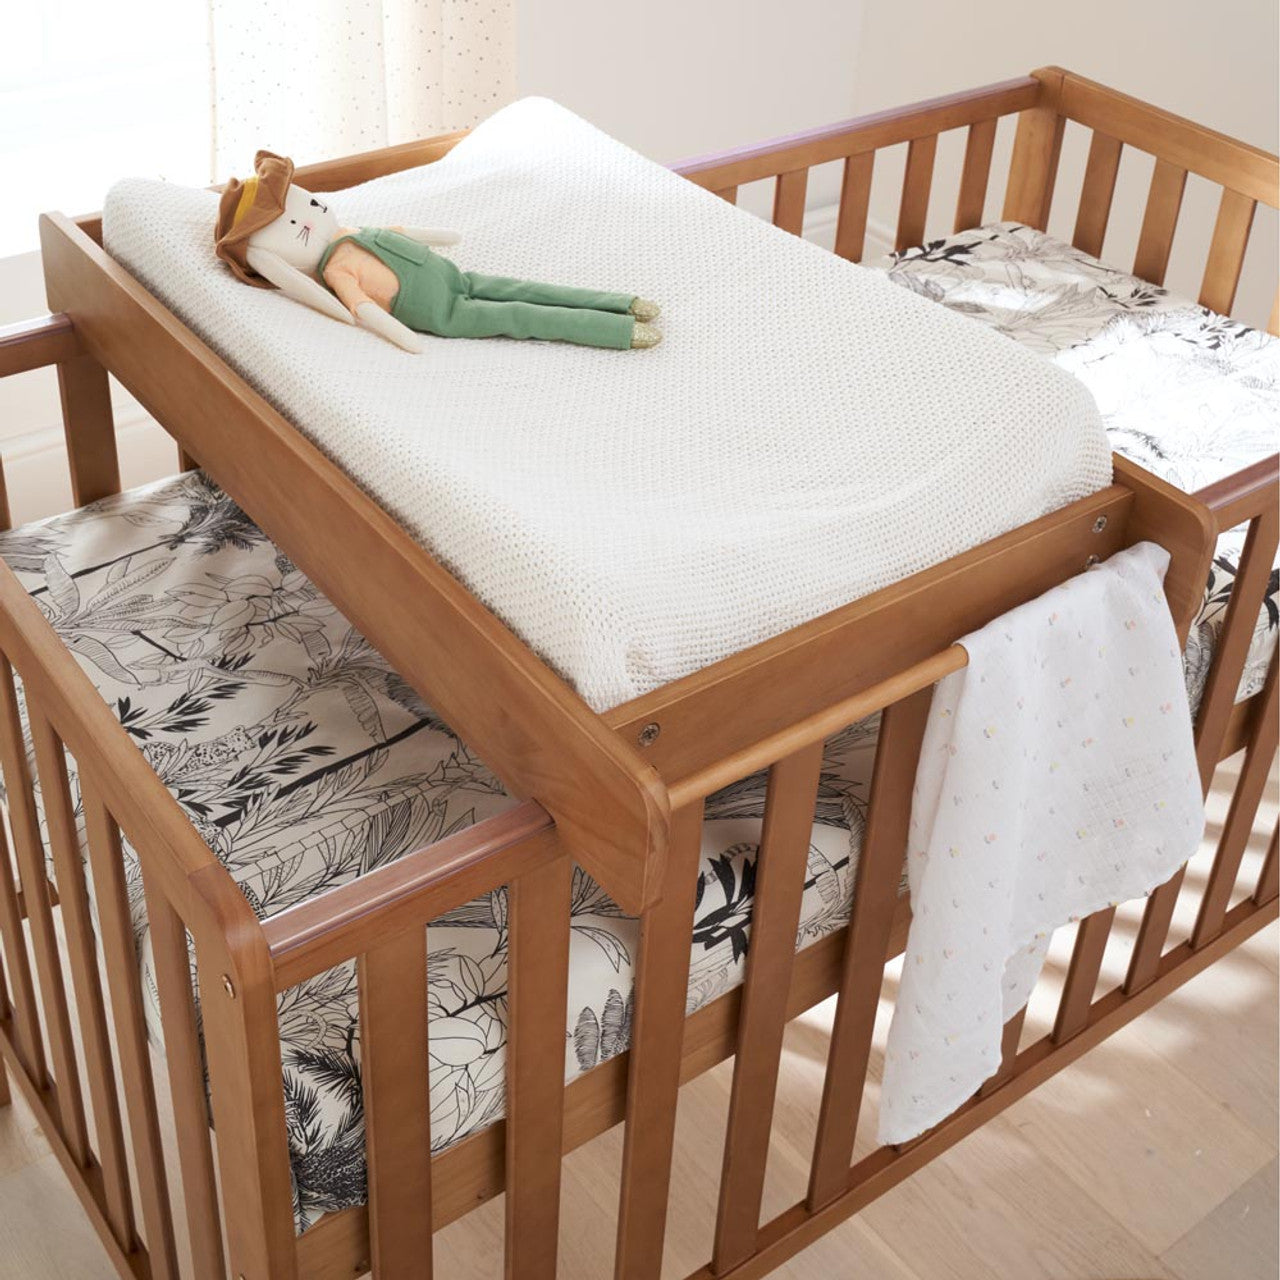 Tutti Bambini Malmo Cot Bed with Rio 2 Piece Room Set - Oak / Dove Grey - For Your Little One